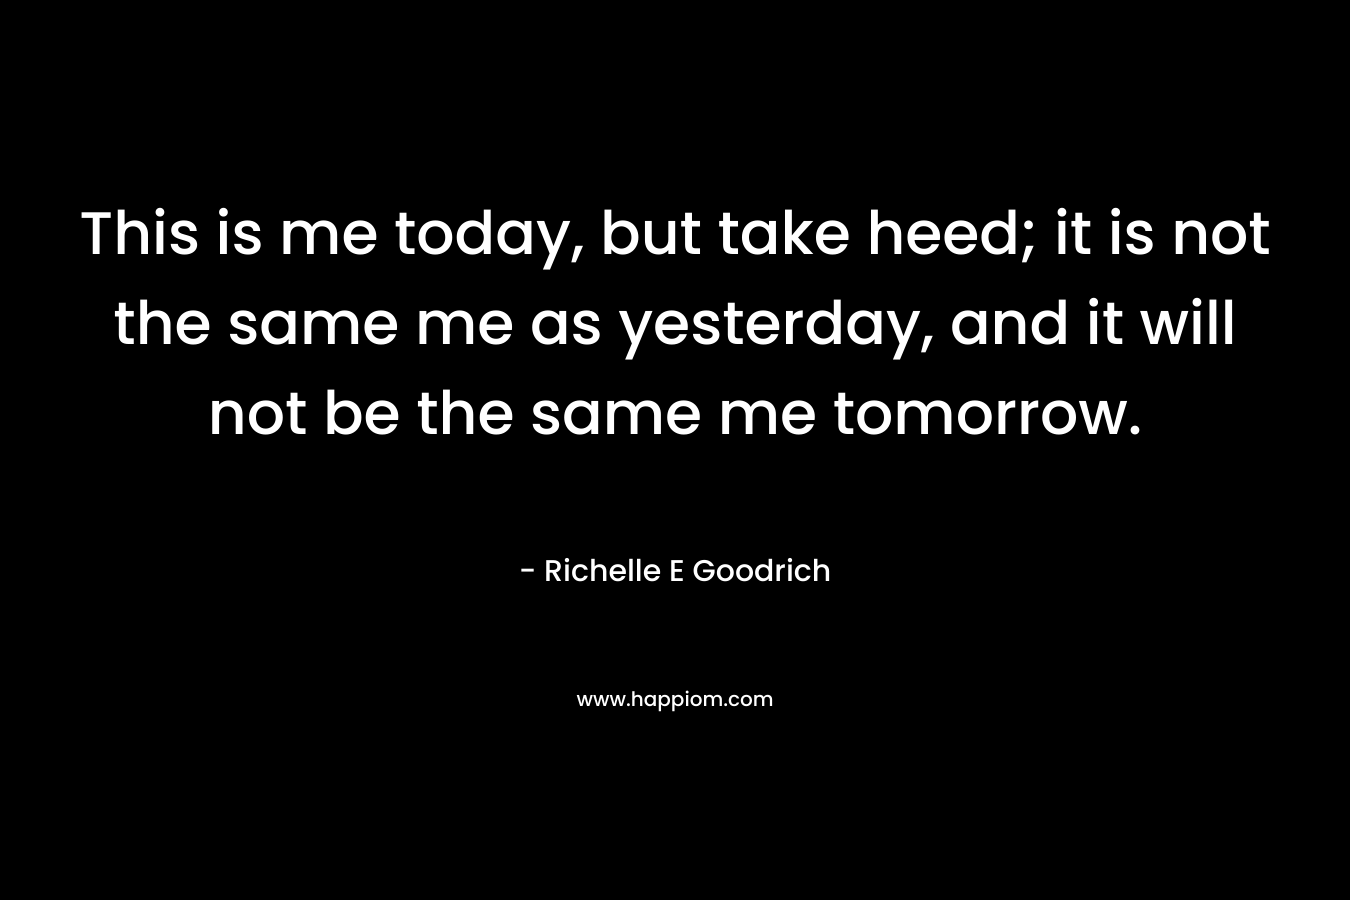 This is me today, but take heed; it is not the same me as yesterday, and it will not be the same me tomorrow. – Richelle E Goodrich